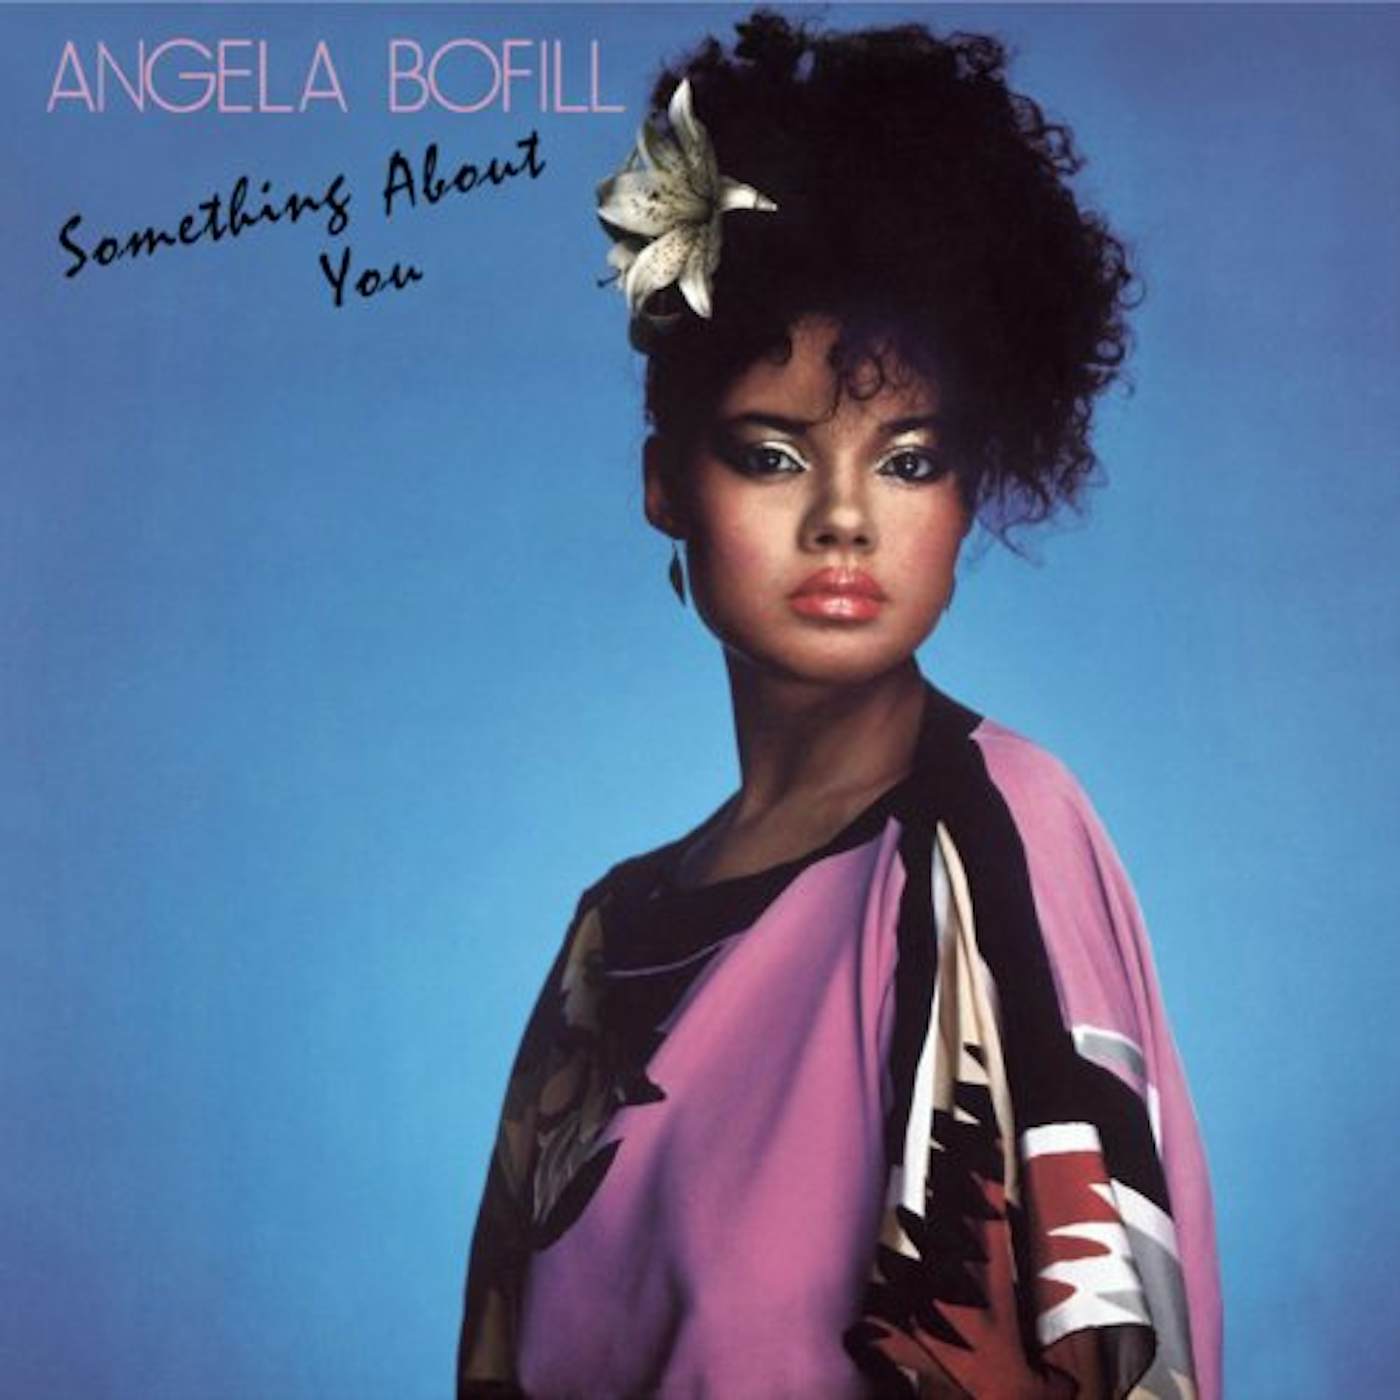 Angela Bofill SOMETHING ABOUT YOU CD